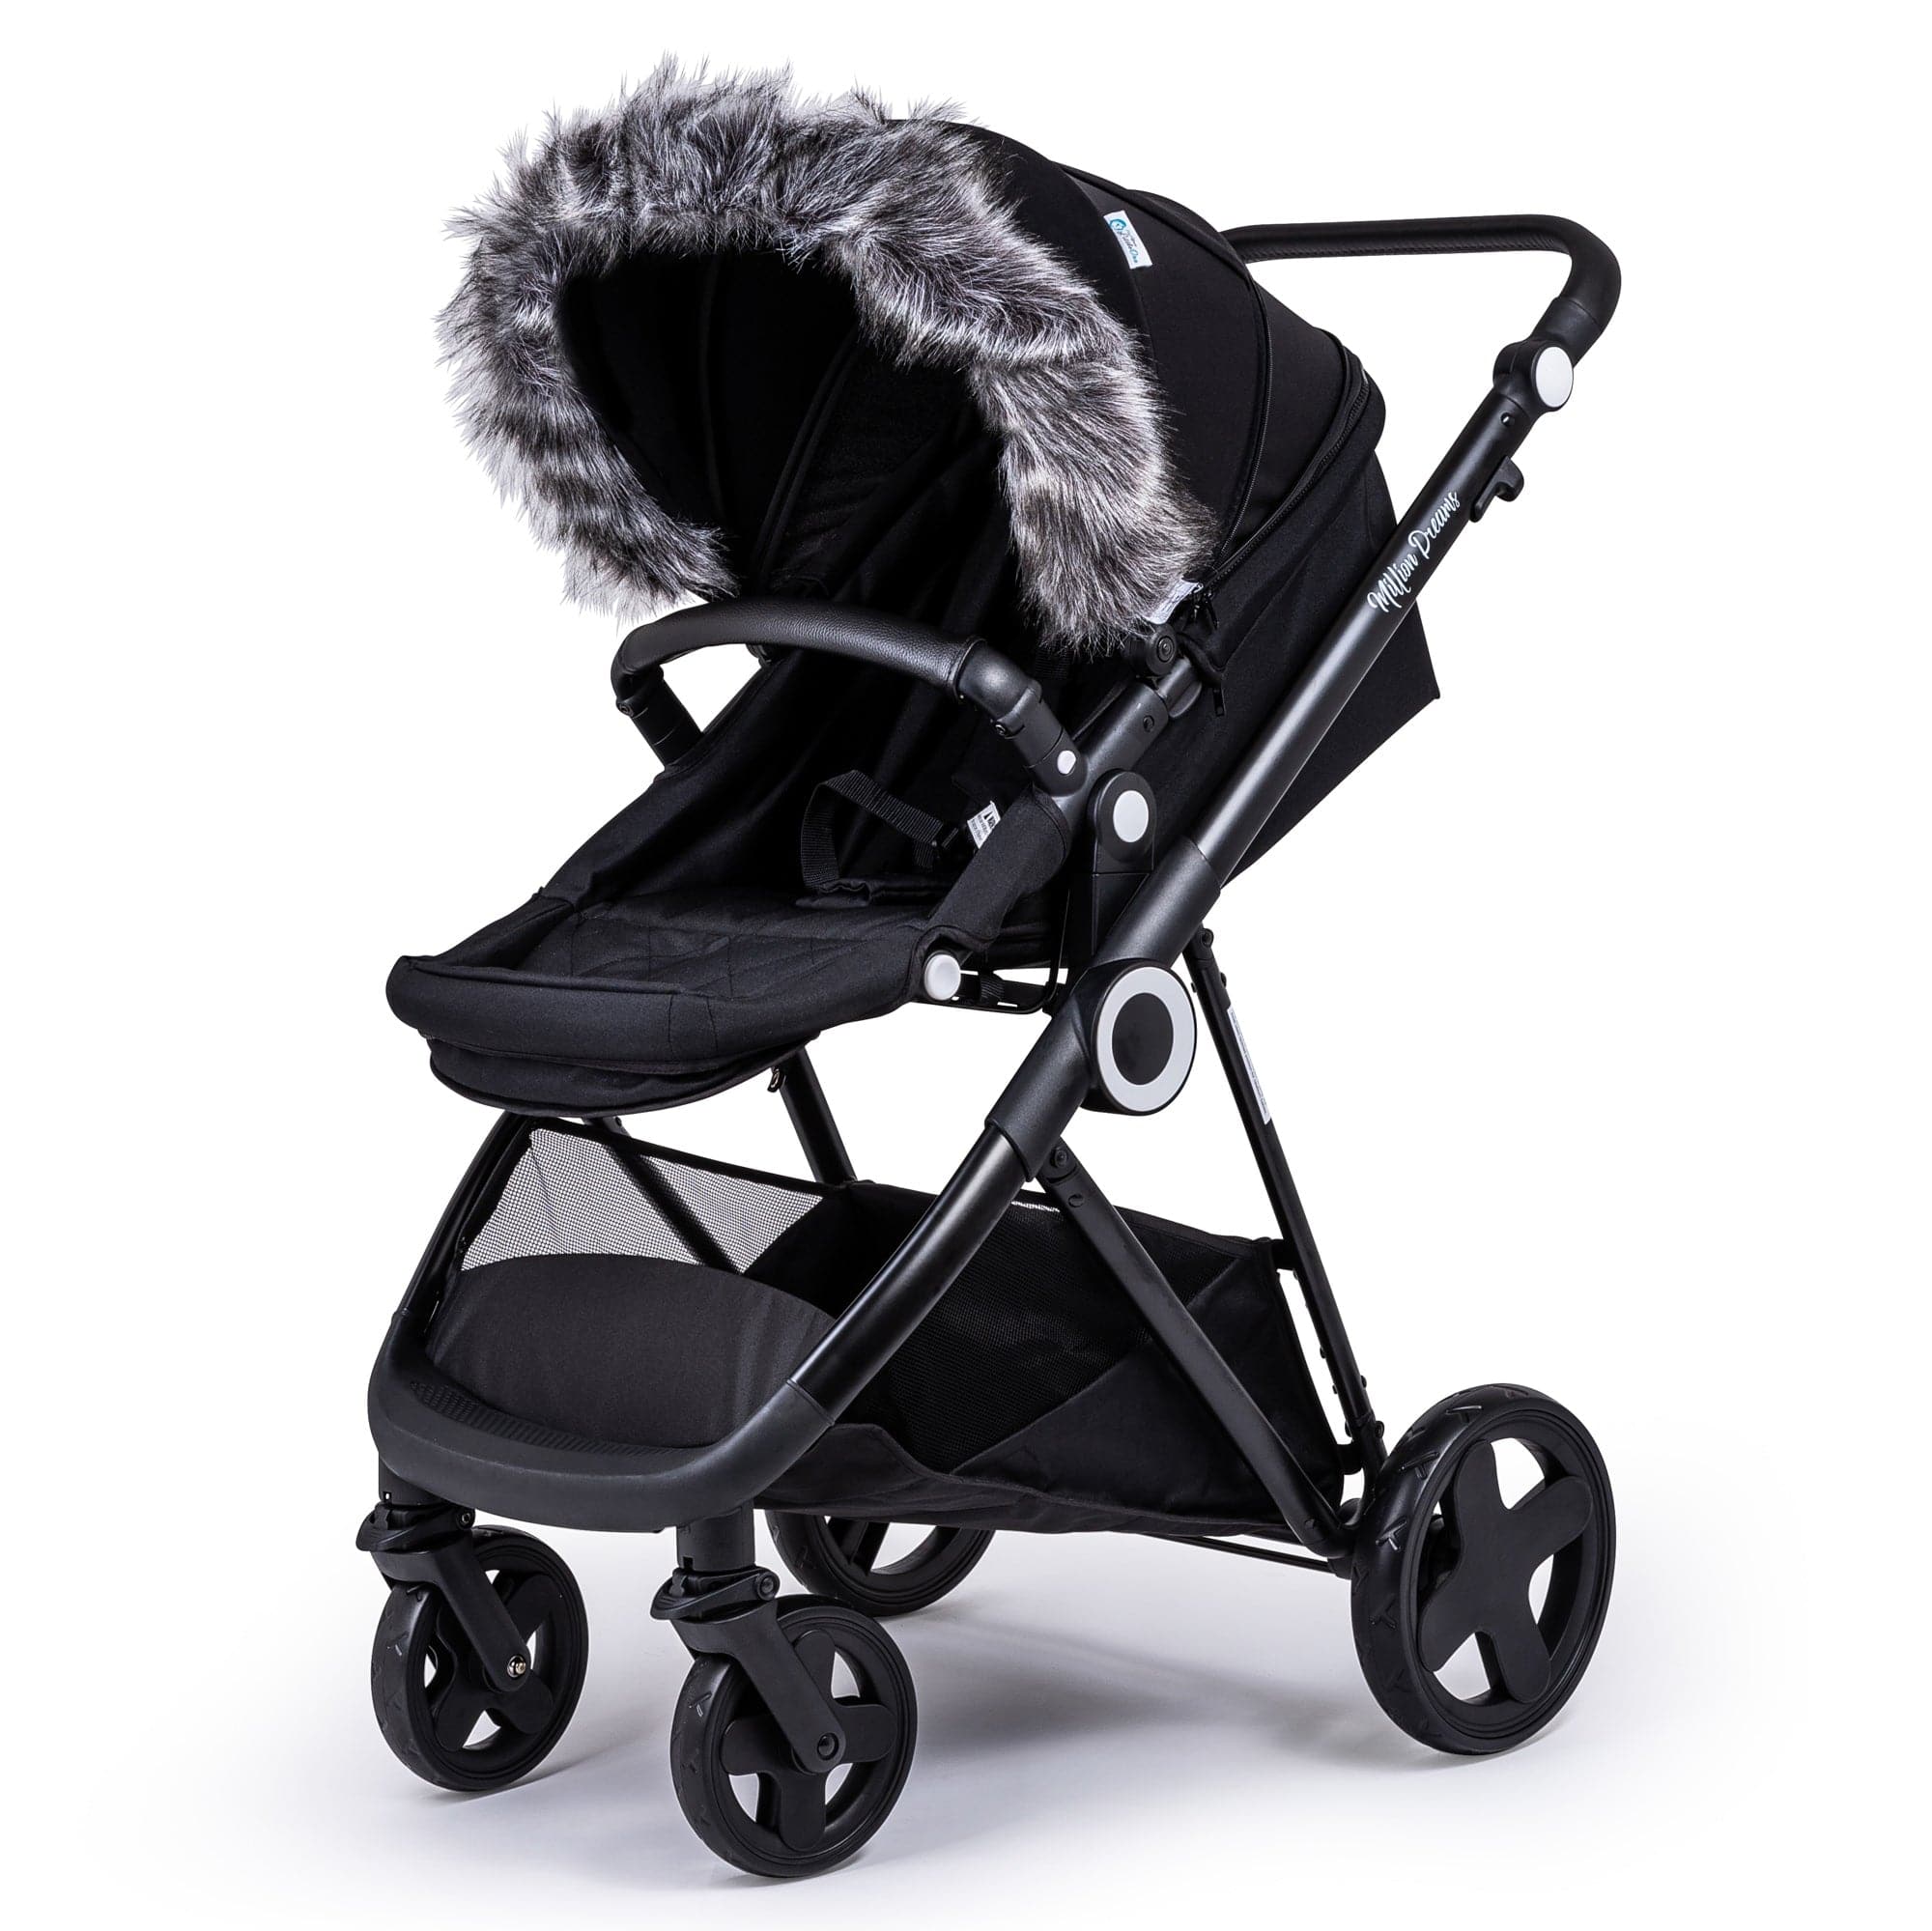 Pram Fur Hood Trim Attachment For Pushchair Compatible with Nuna - Dark Grey / Fits All Models | For Your Little One